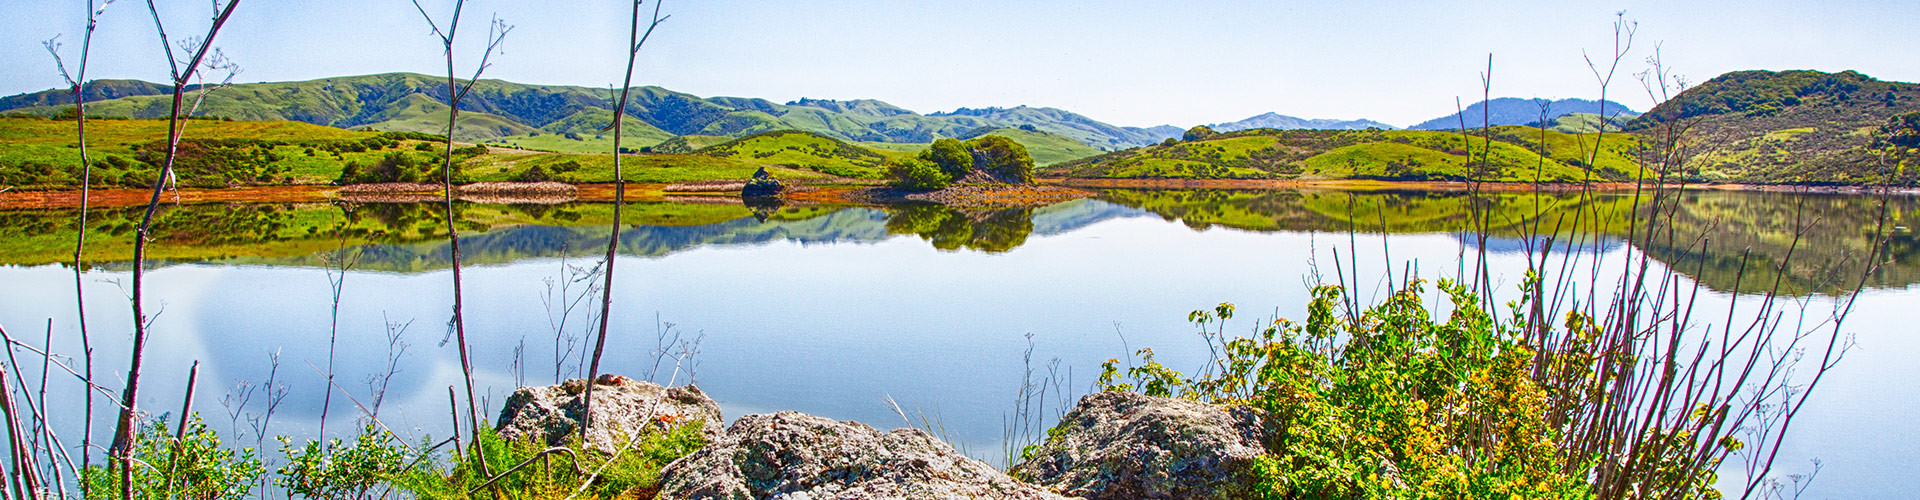 Calm waters on Nicasio Reservoir